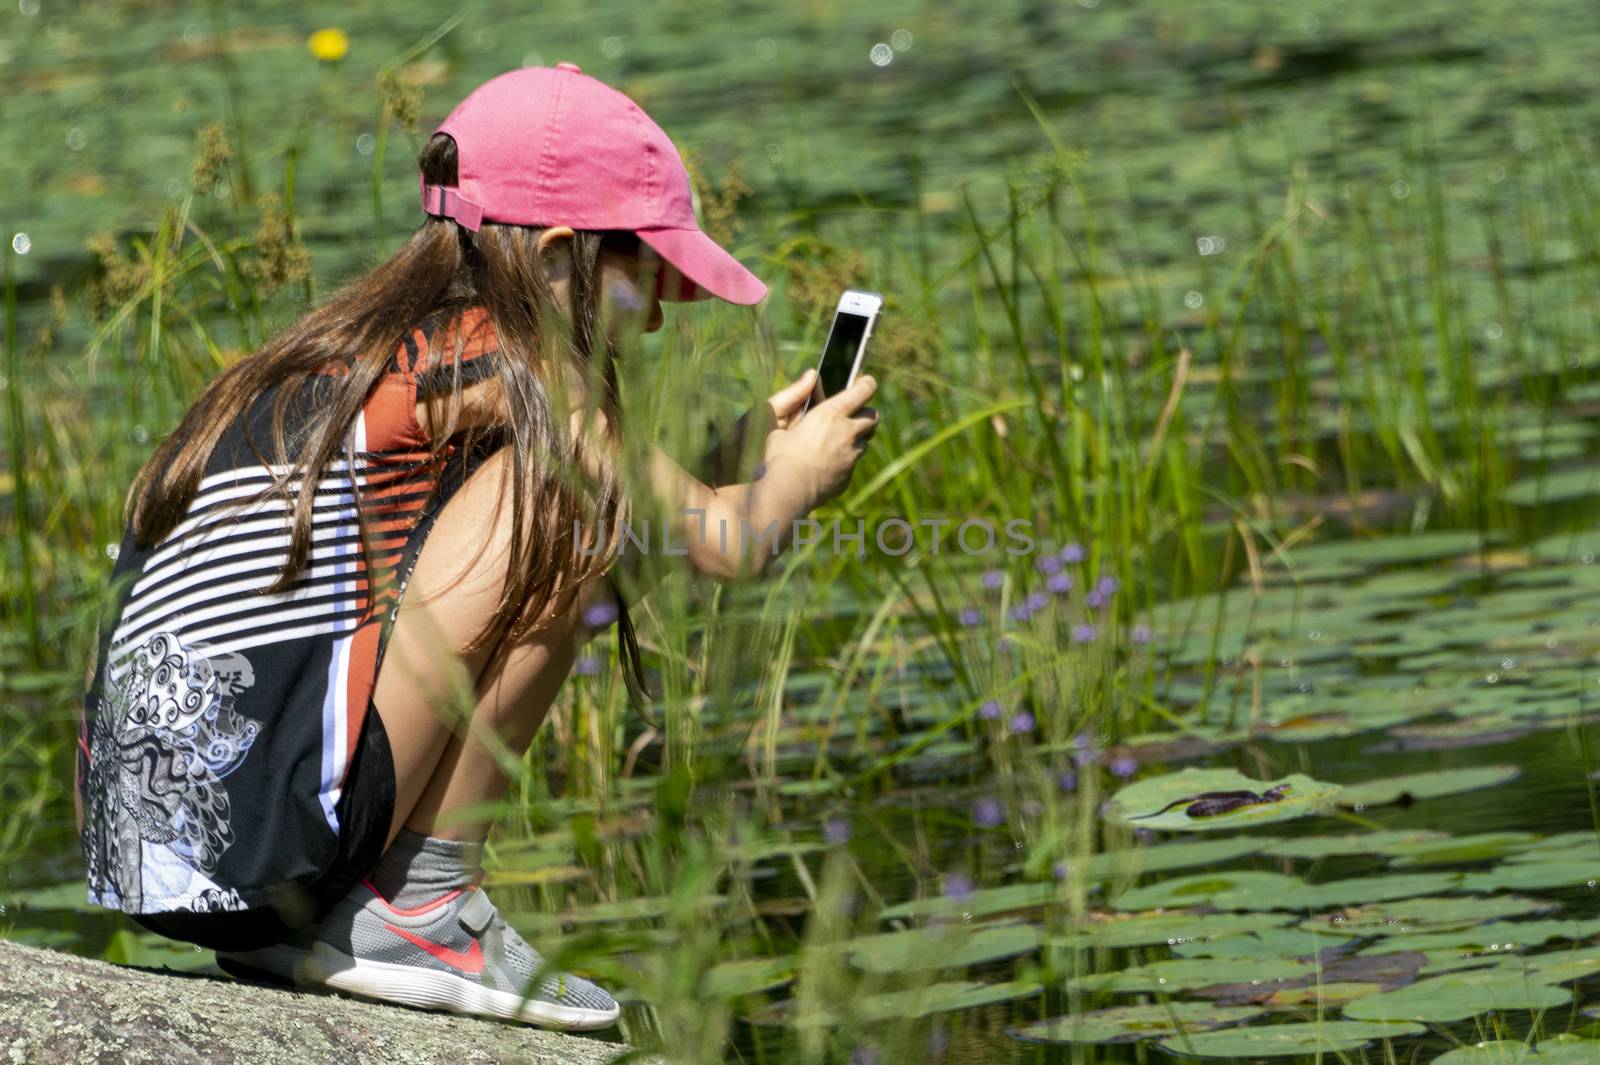 The girl saw a snake on the lake and is trying to photograph it